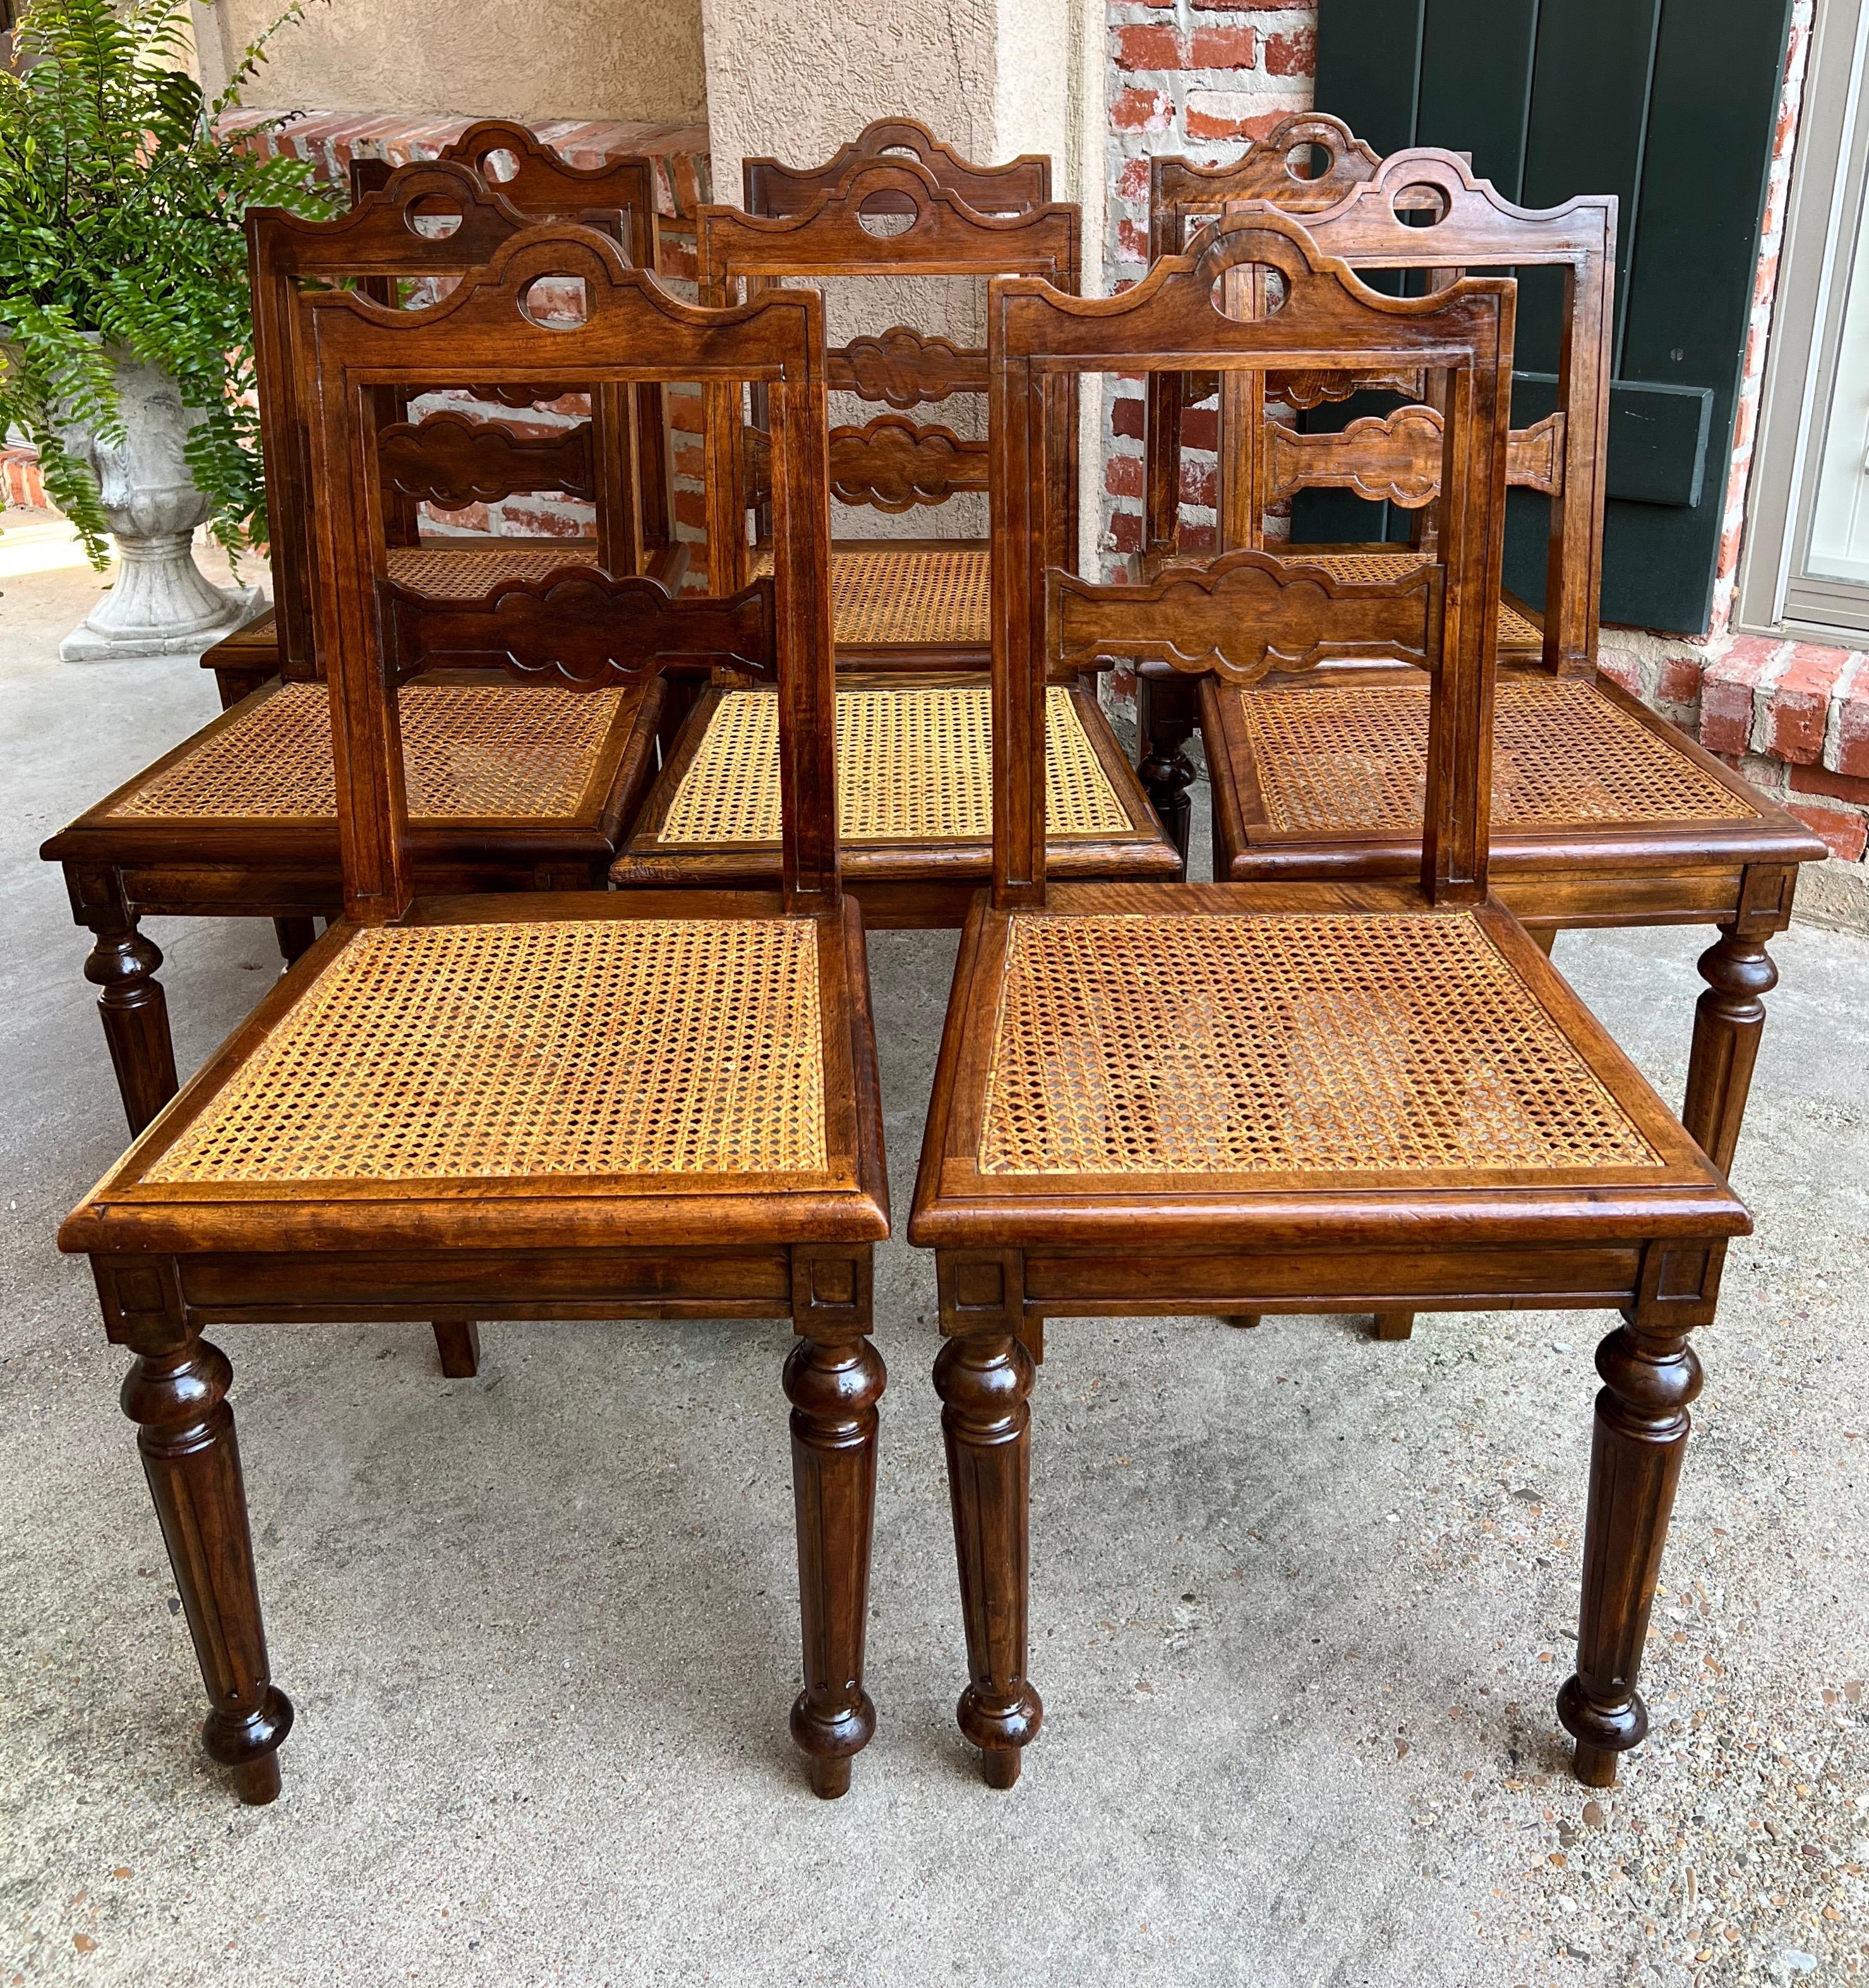 Set 8 Antique French Provincial carved oak ladder back dining kitchen chair cane seat.

Direct from France, a lovely set of 8 antique French chairs with classic French style. Shaped panel ladder backs with arched upper crowns and shaped horizontal